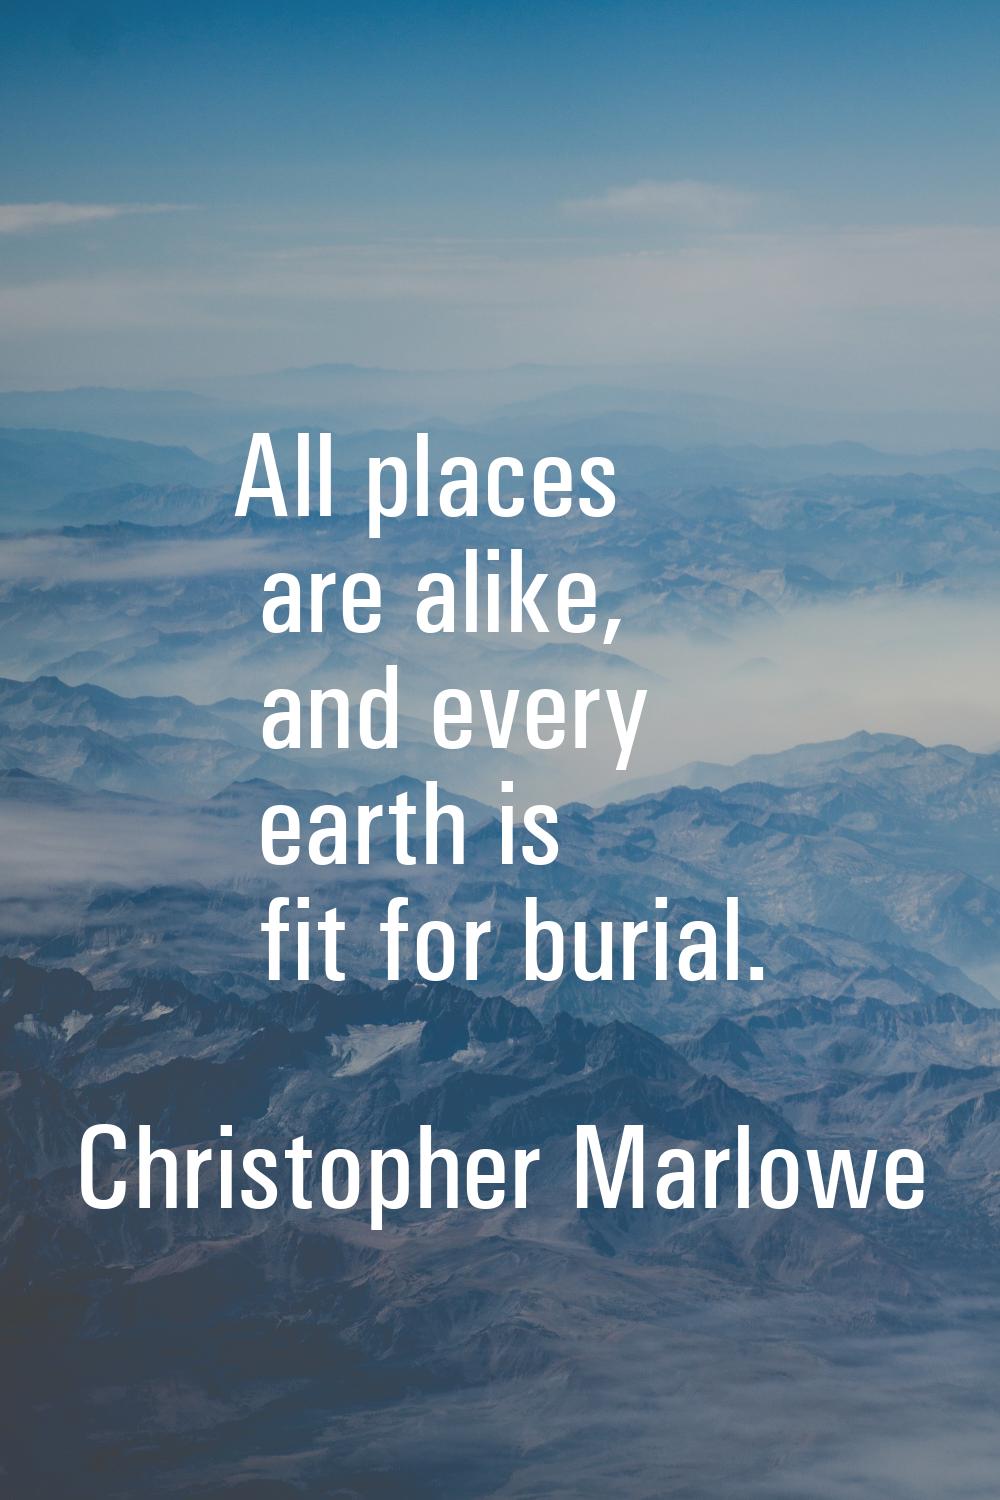 All places are alike, and every earth is fit for burial.